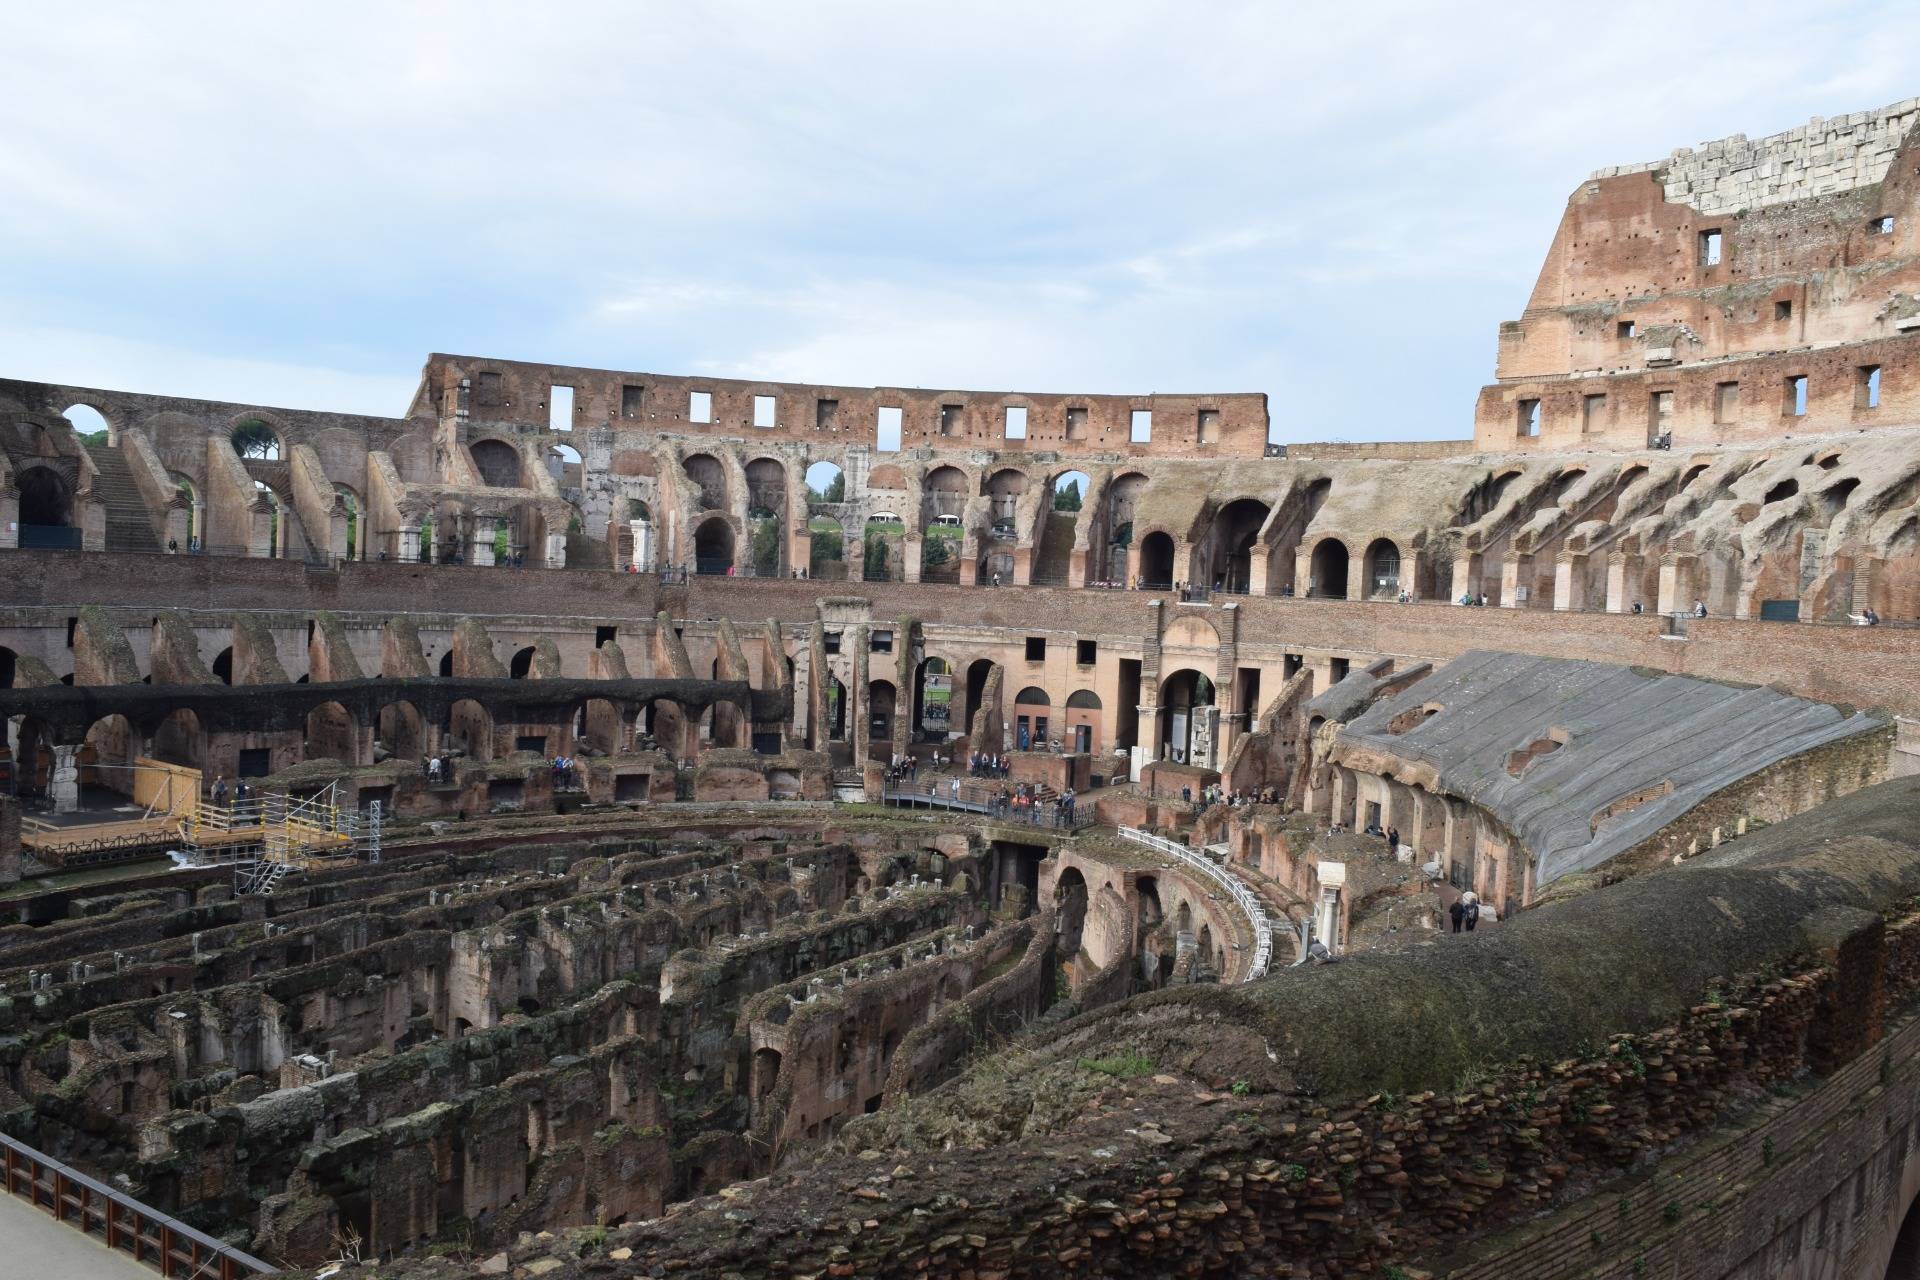 A weekend in Rome, part one - Colosseum and the Roman Forum